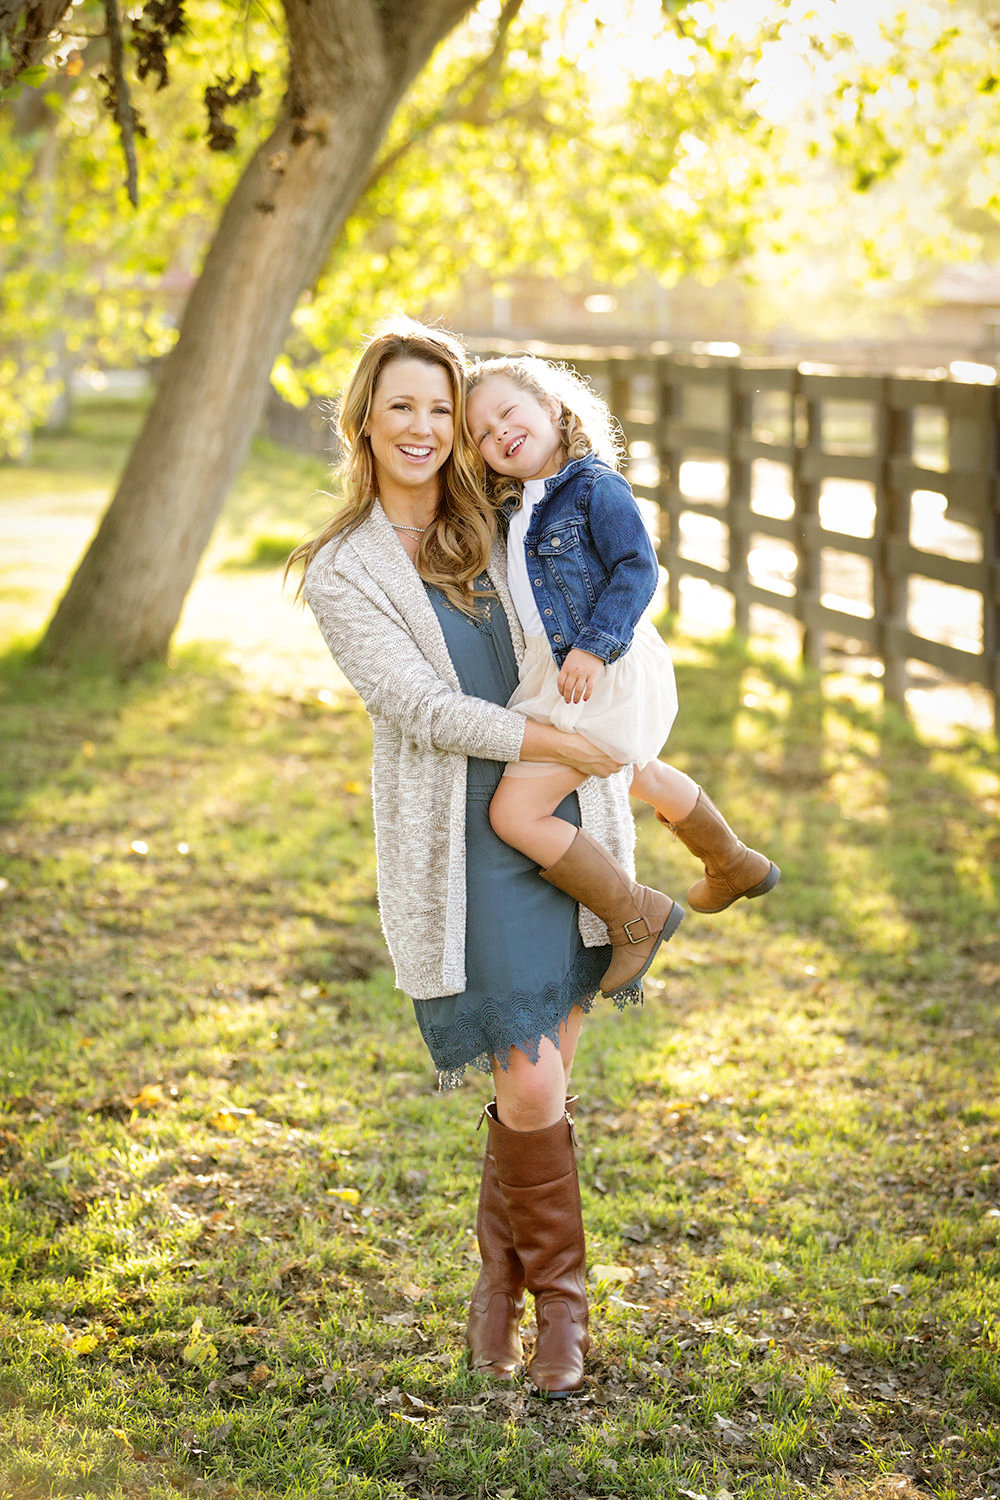 san diego family photographer | family in a field with leafs and fall colors outdoors smiling